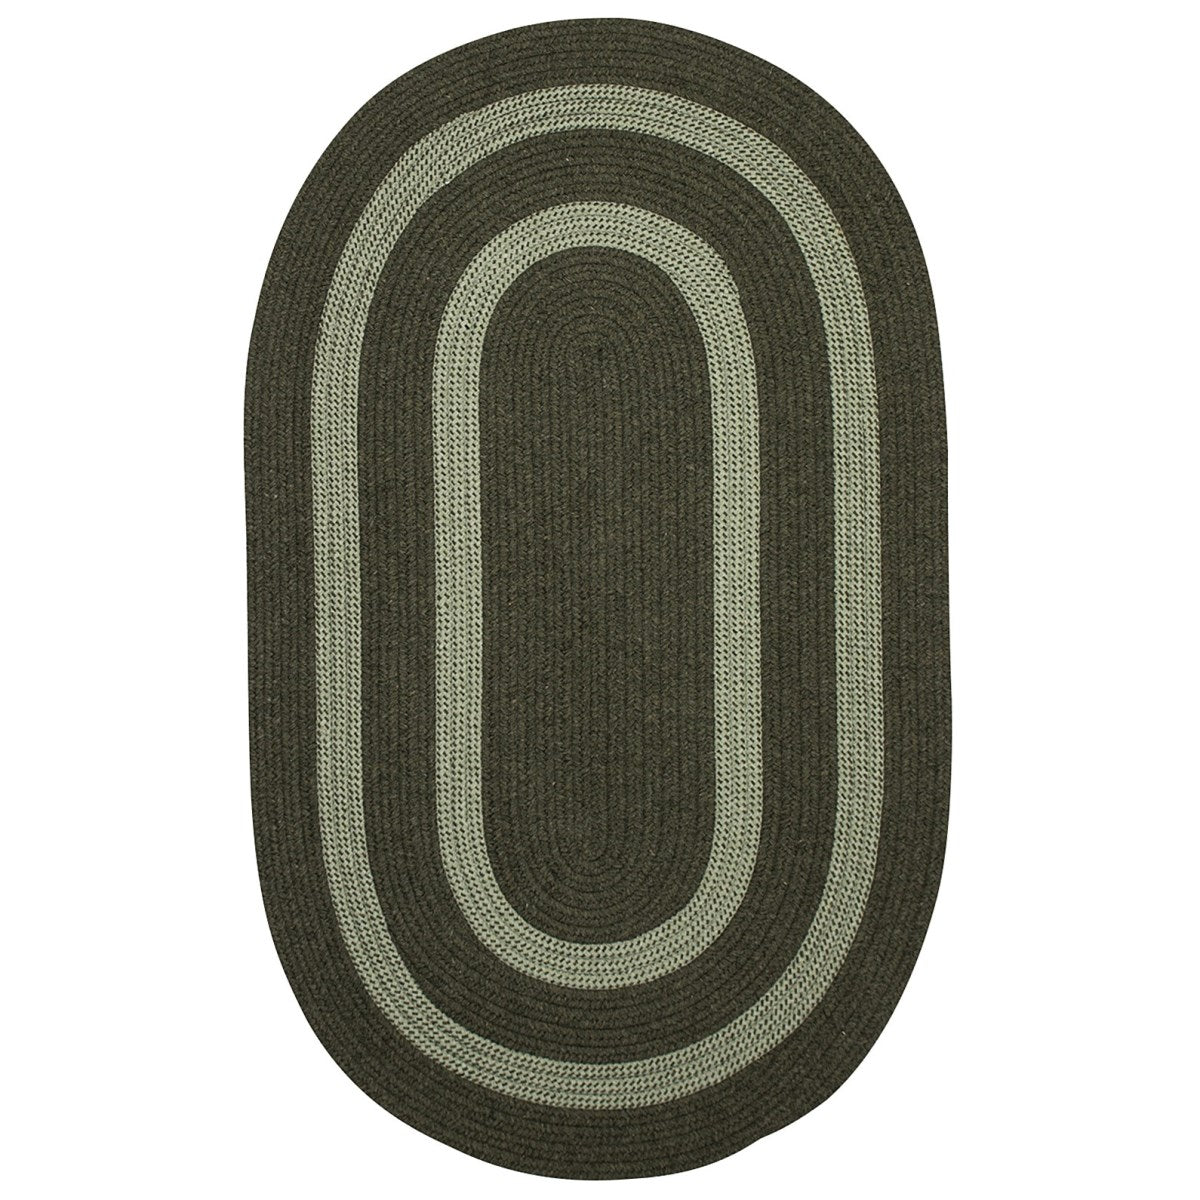 Graywood Moss Green Outdoor Braided Oval Rugs